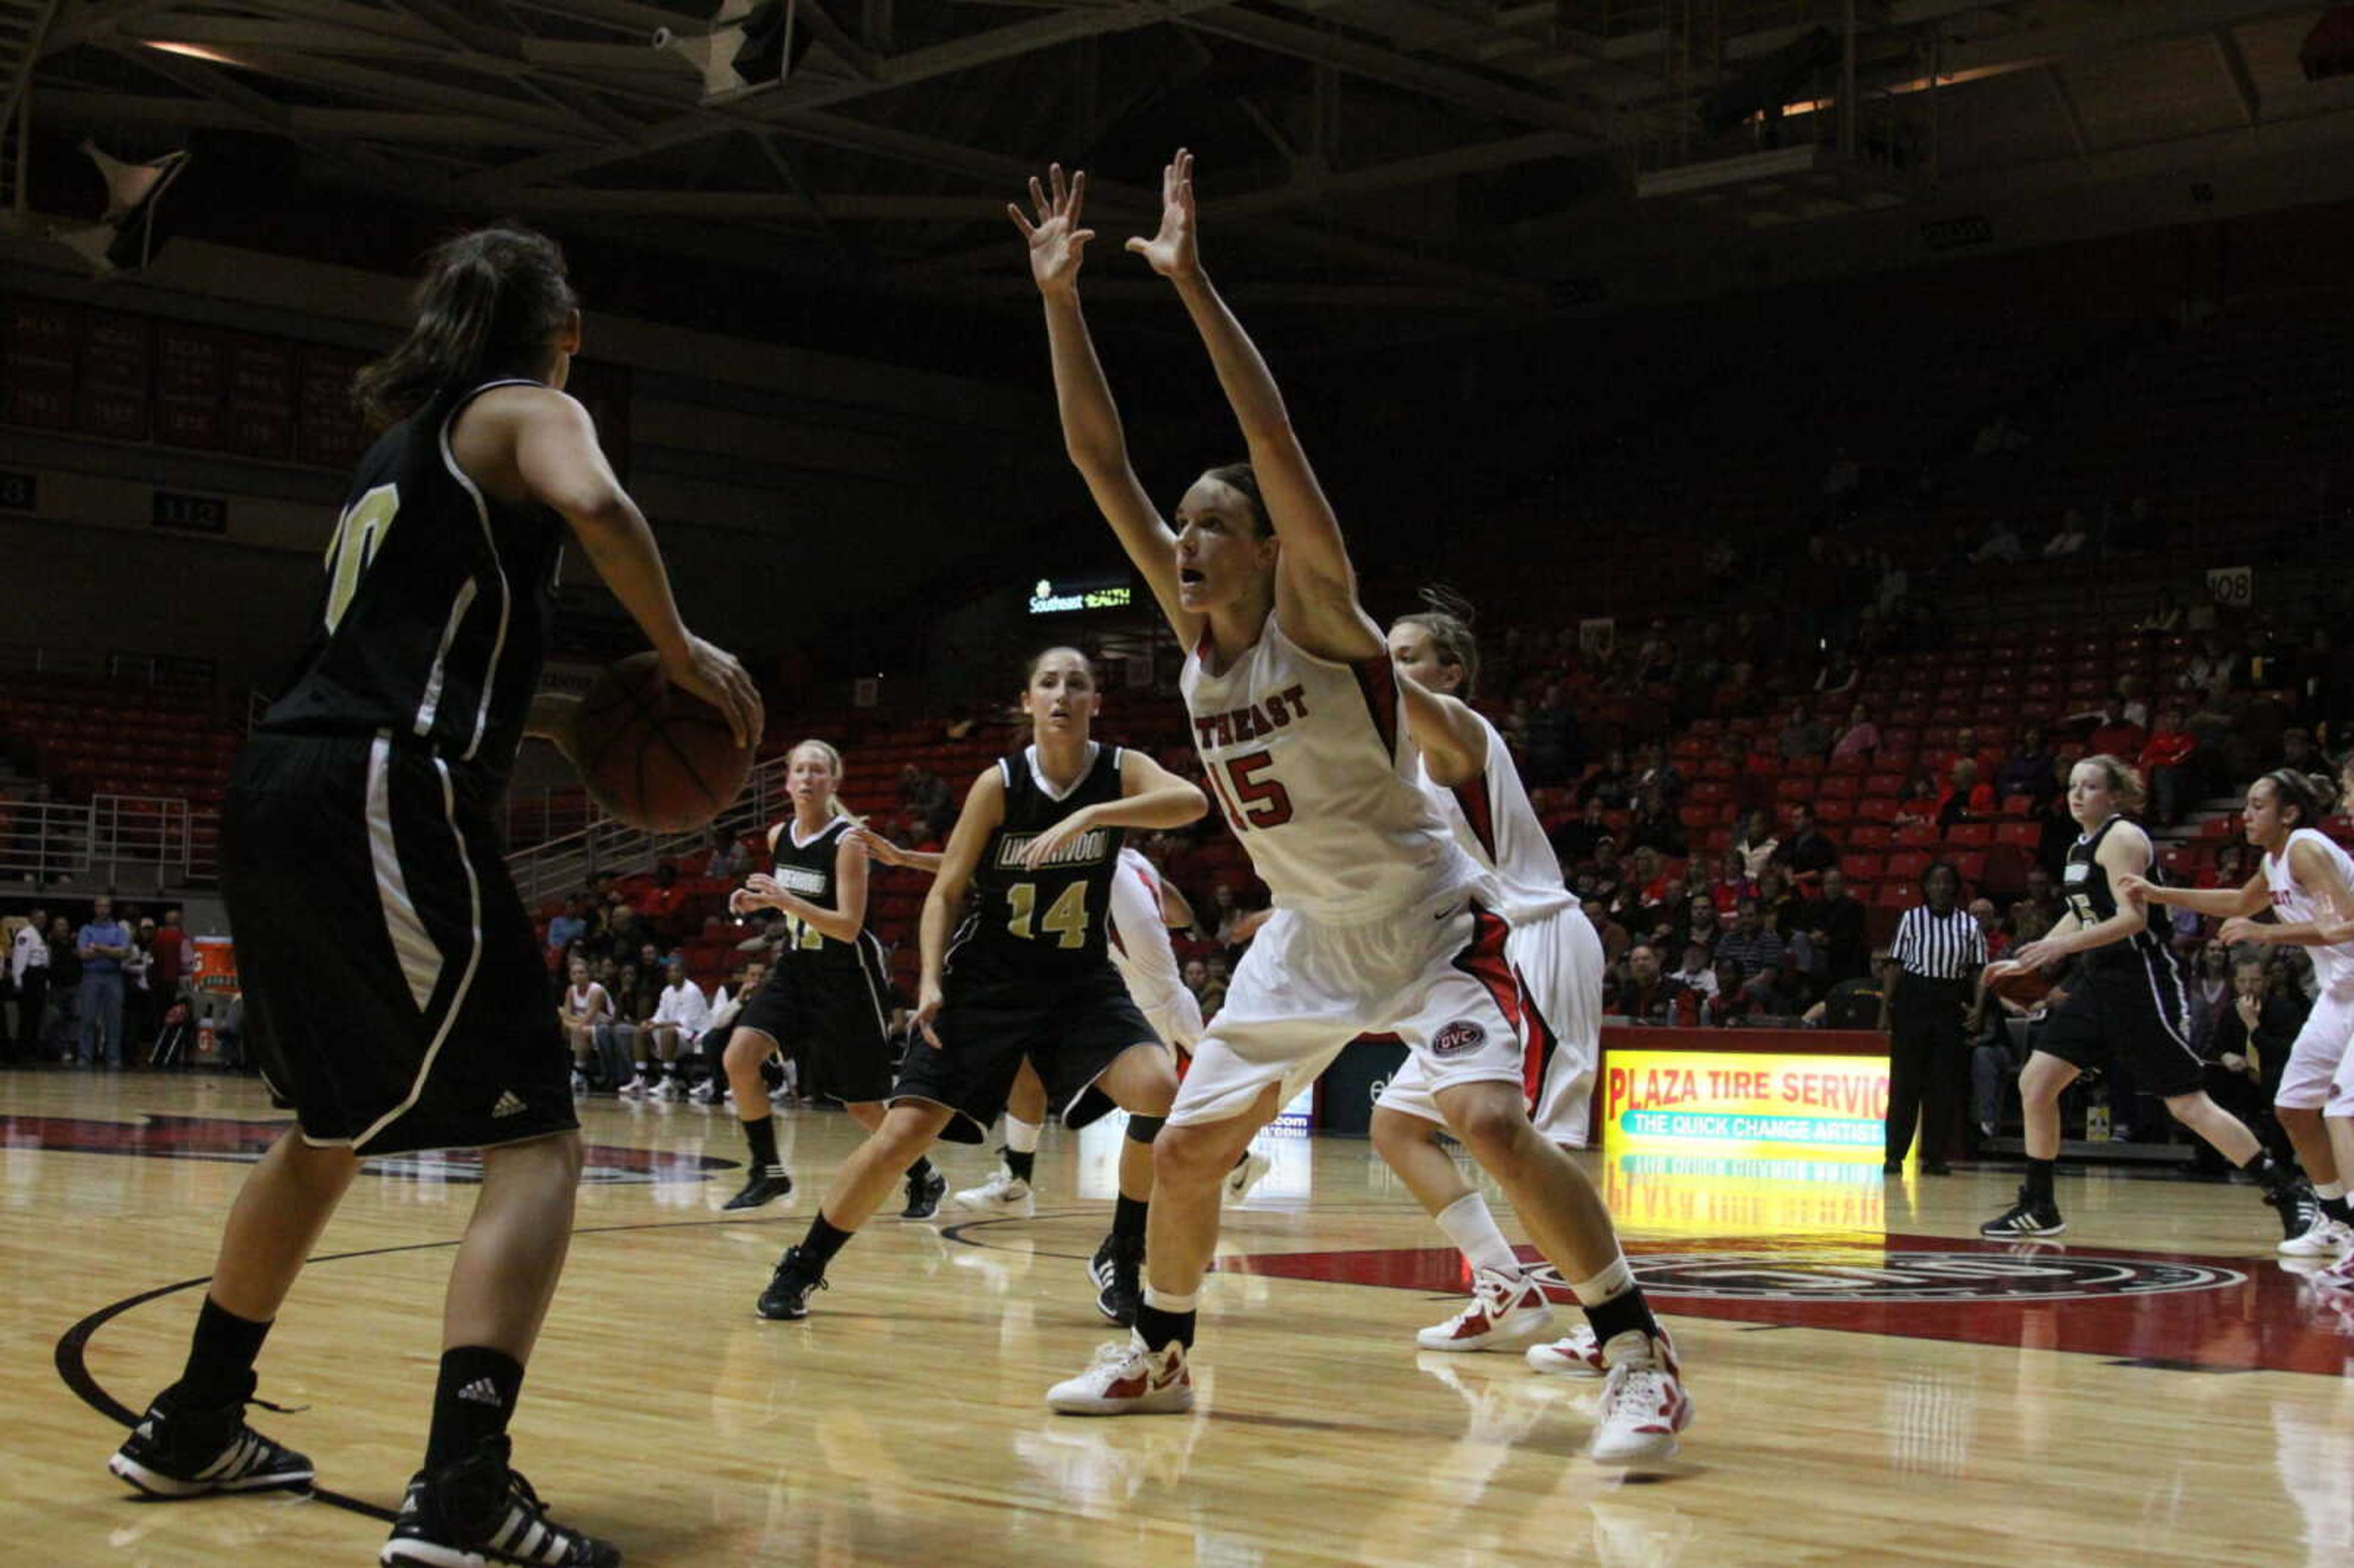 Junior forward Courtney Shiffer defends a Lindenwood player during Saturday's game. Southeast won the game 66-56. Shiffer recorded her first career double-double with 13 points and a career-high 17 rebounds. - Photo by Kelso Hope